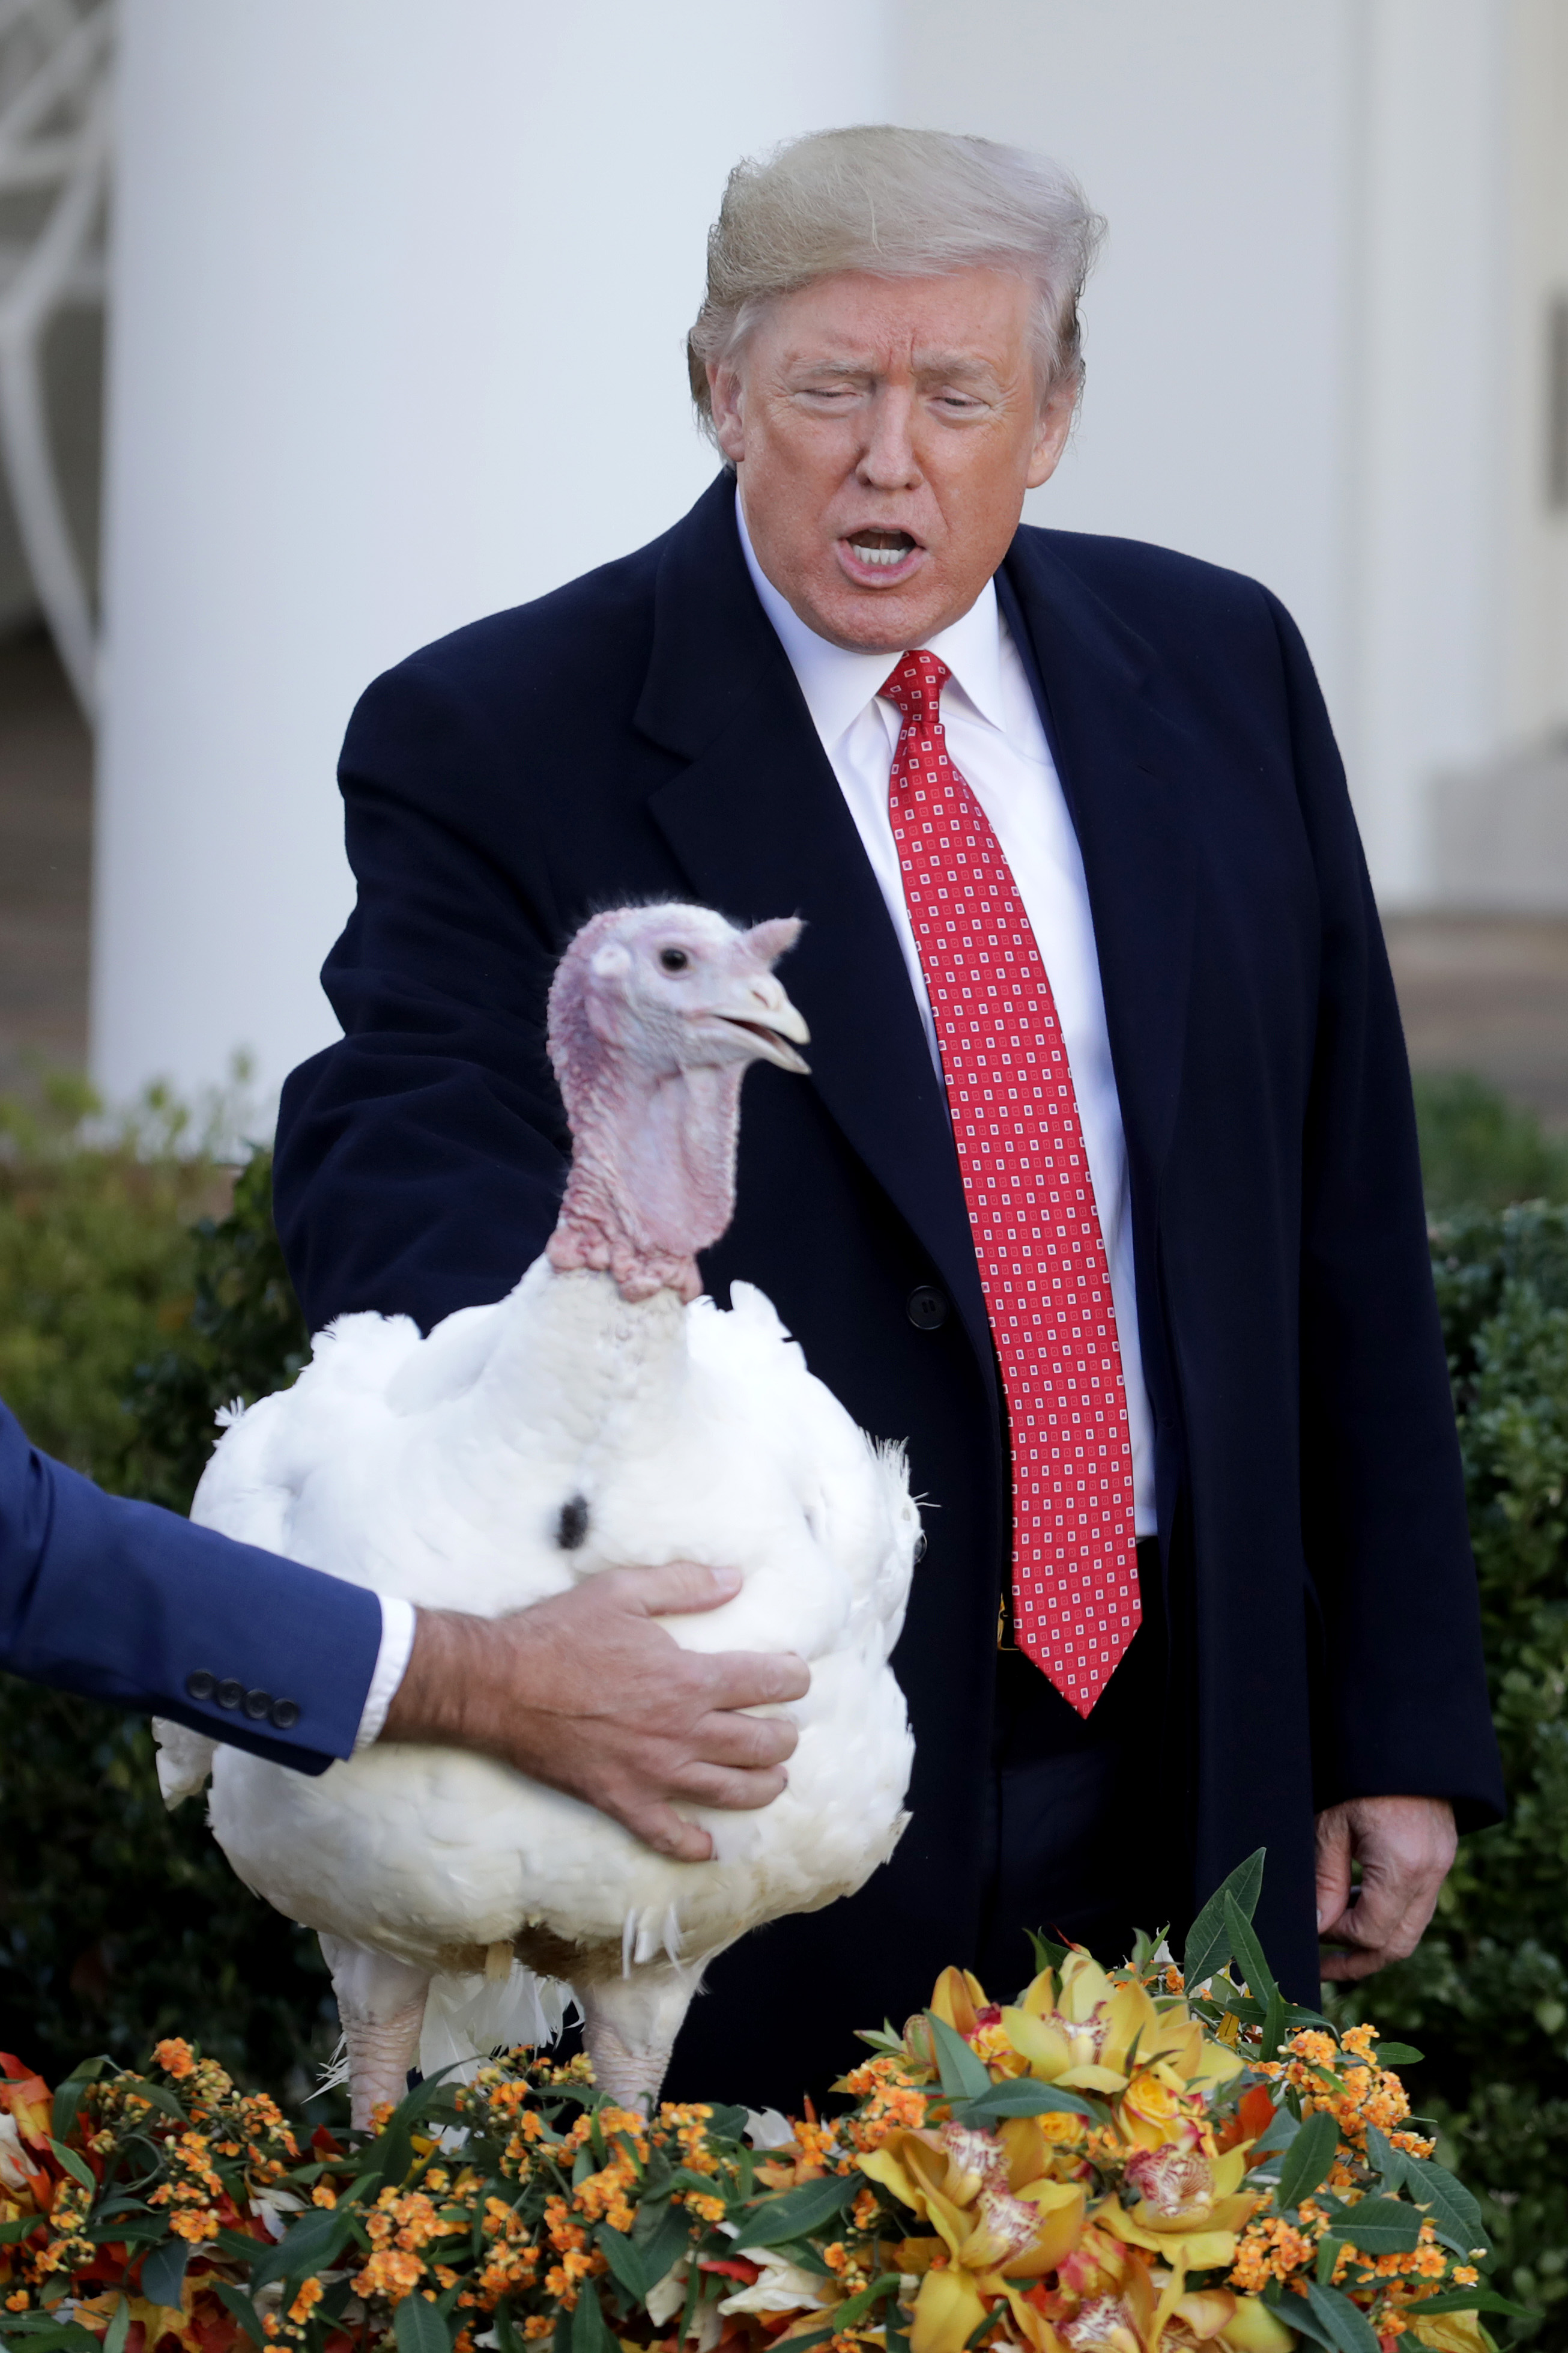 U.S. President Donald Trump gives a presidential ‘pardon’ to the National Thanksgiving Turkey 'Butter' during the traditional event in the Rose Garden of the White House November 26, 2019. (Chip Somodevilla/Getty Images)